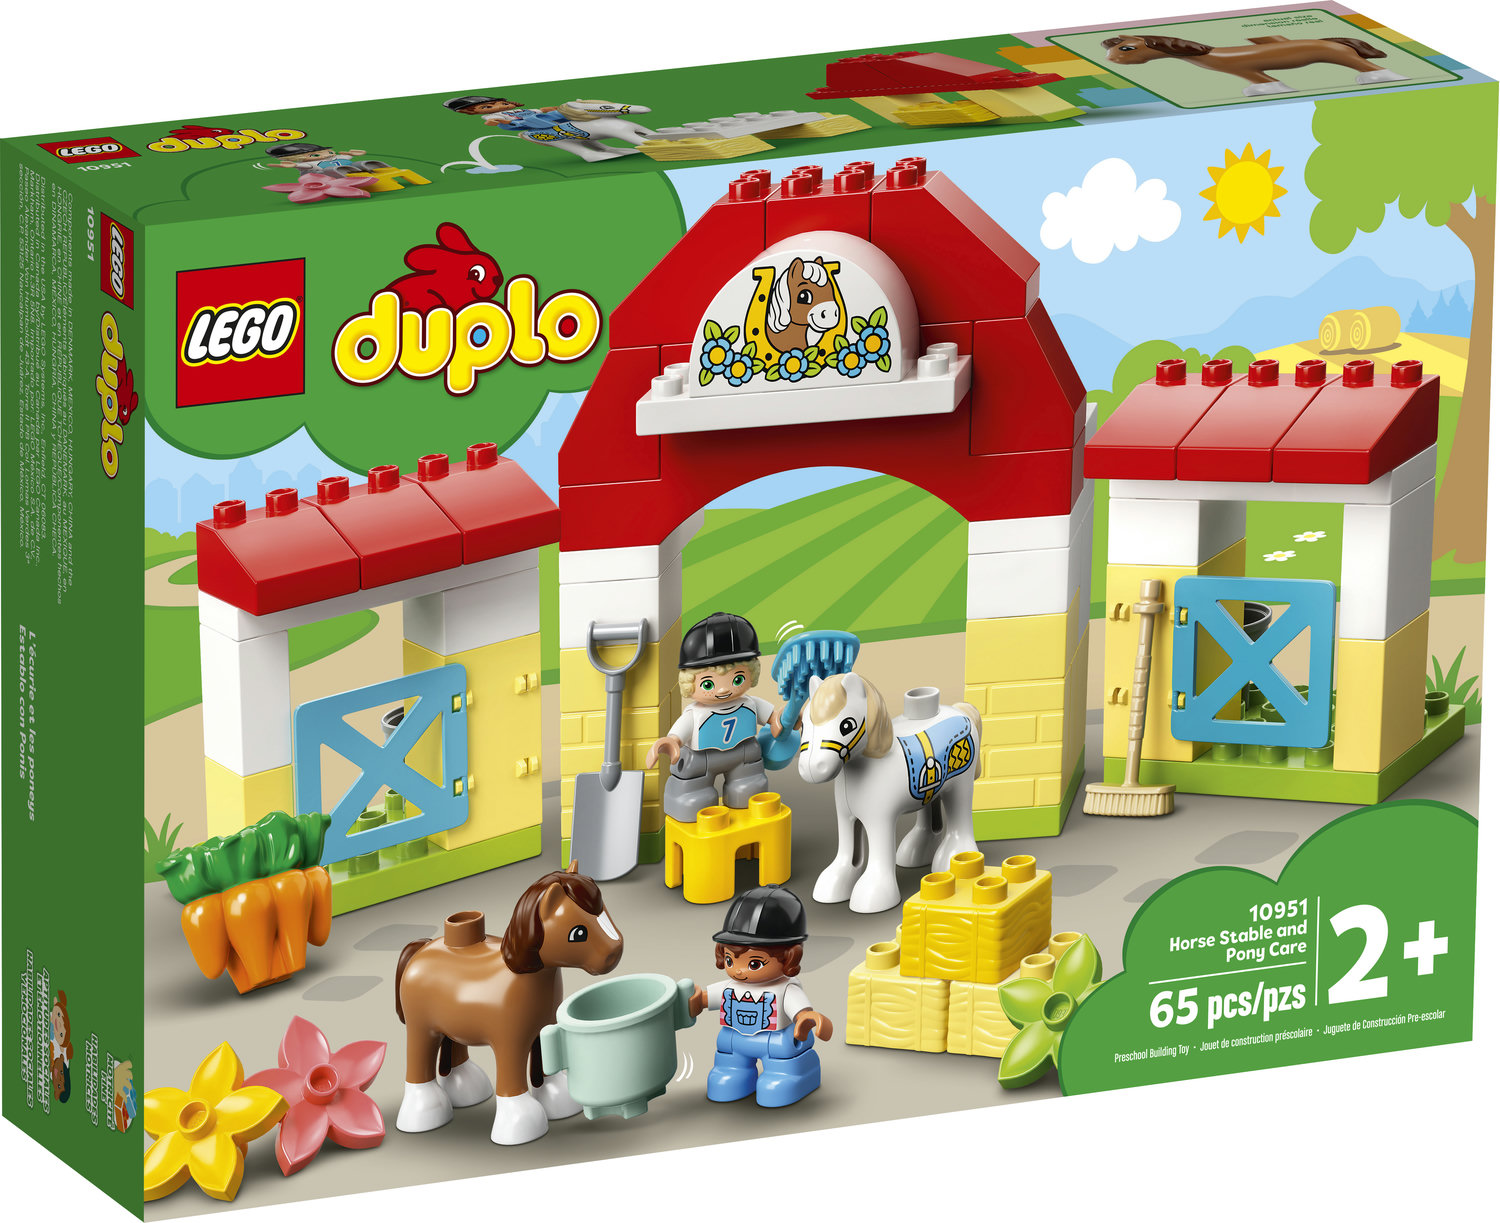 LEGO DUPLO Town Horse Stable and Pony Care 10951 Learning Toy for Preschoolers (65 Pieces) - image 1 of 9